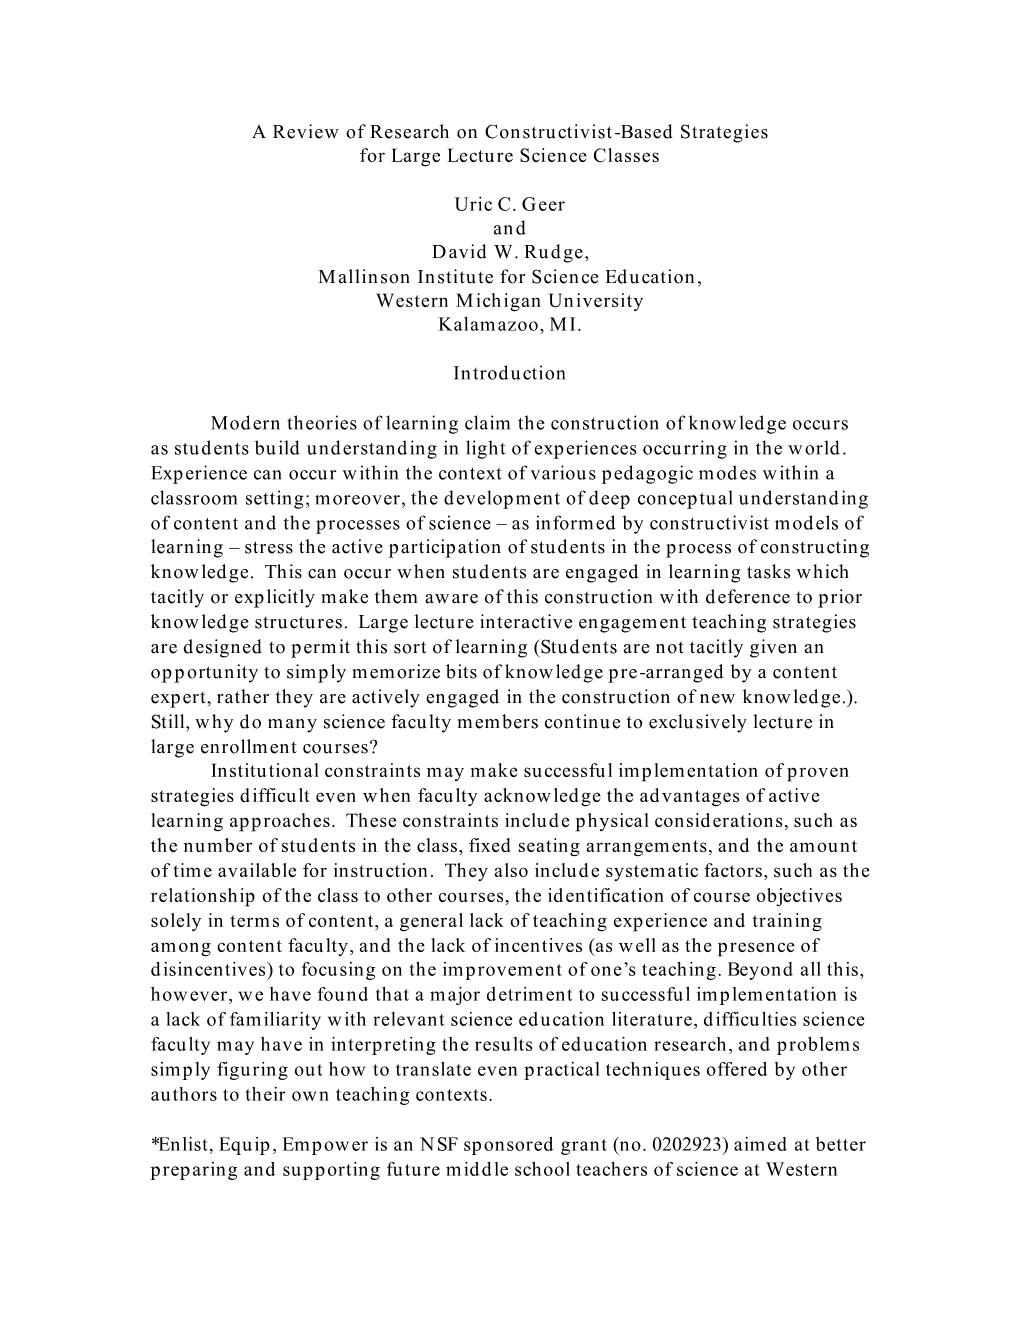 A Review of Research on Constructivist-Based Strategies for Large Lecture Science Classes